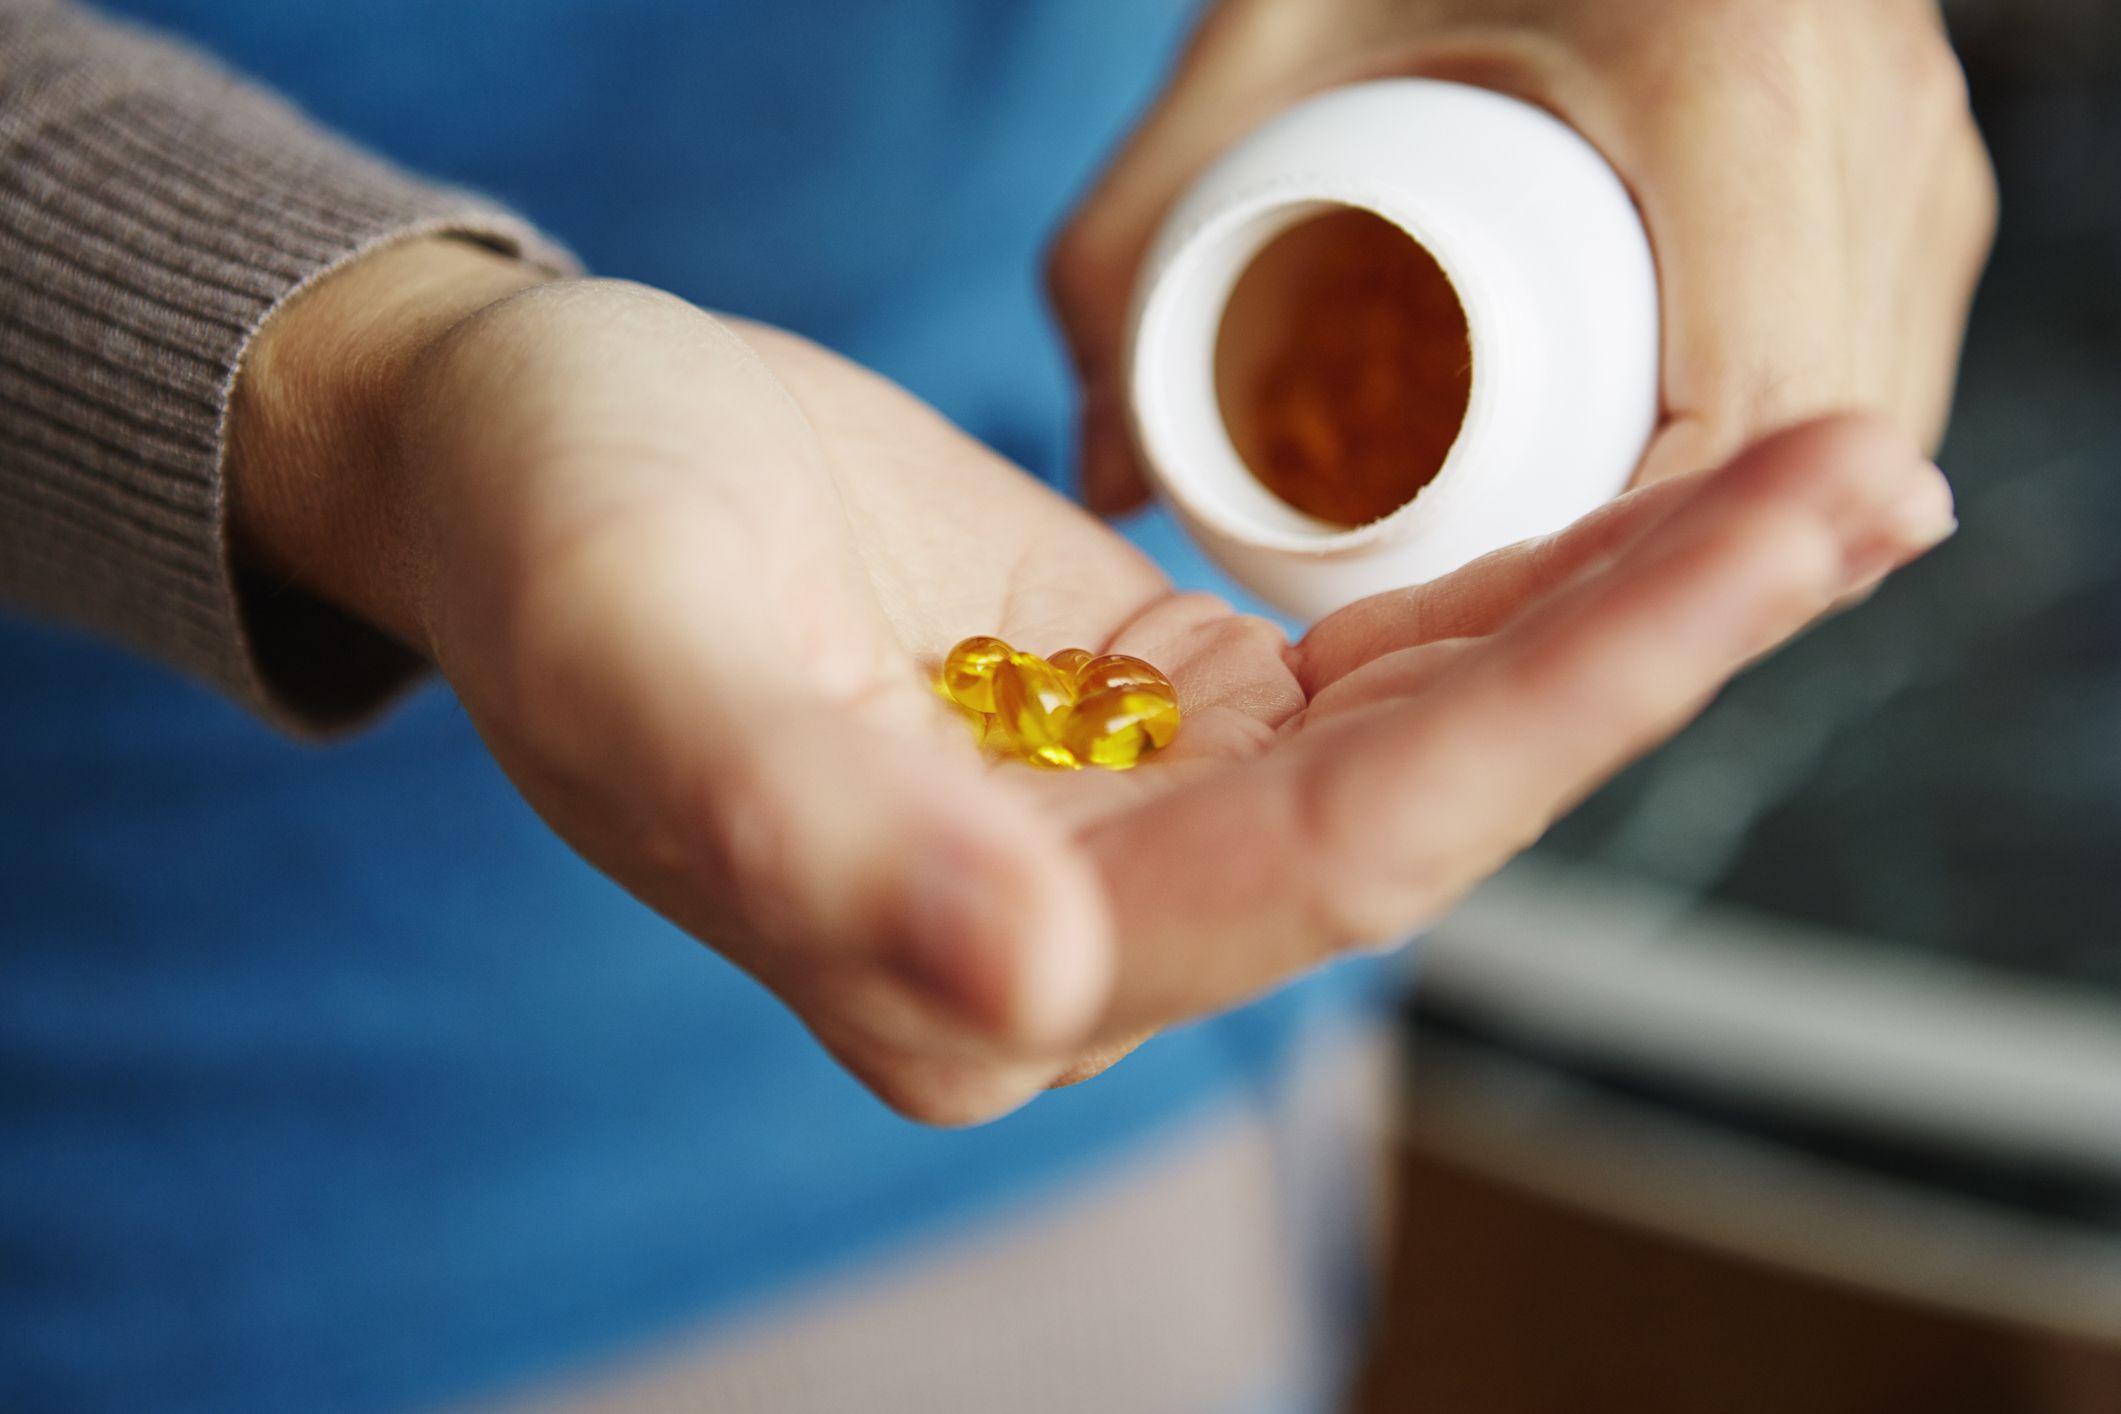 14 Best Anti-Aging Supplements and Vitamins Worth Trying